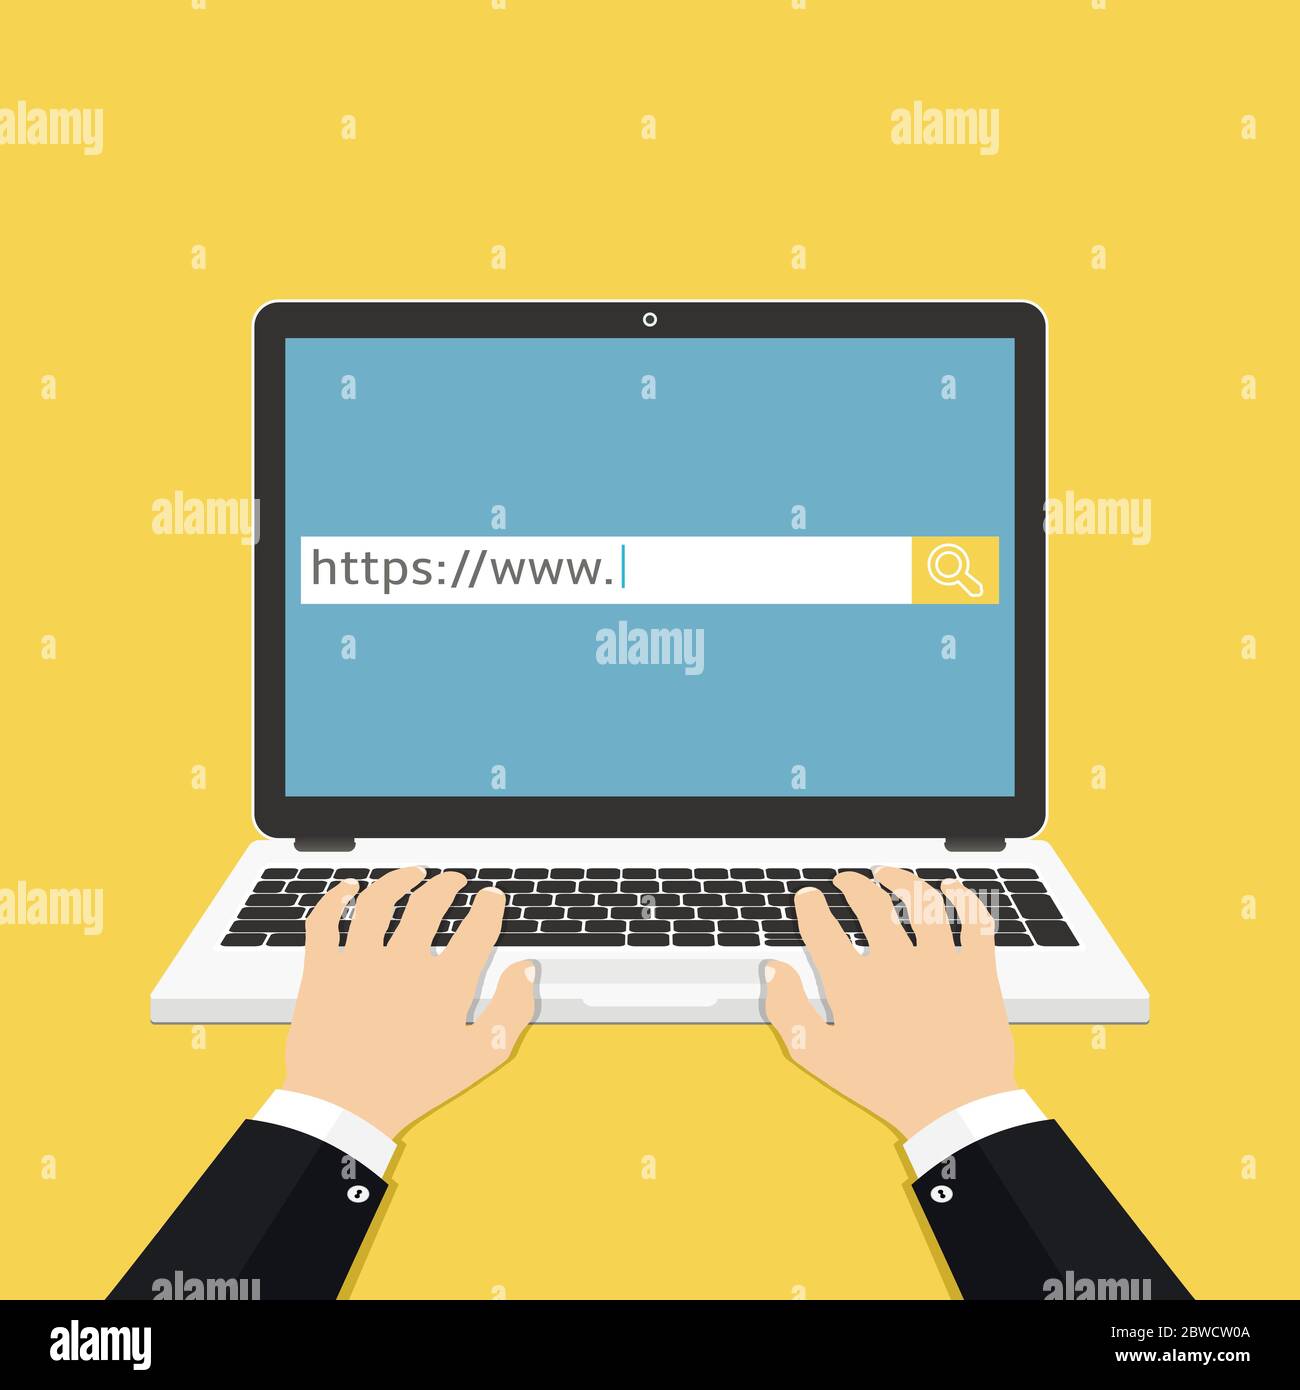 Concept vector illustration of man hands using laptop for searching in web browser. Flat design. Stock Vector